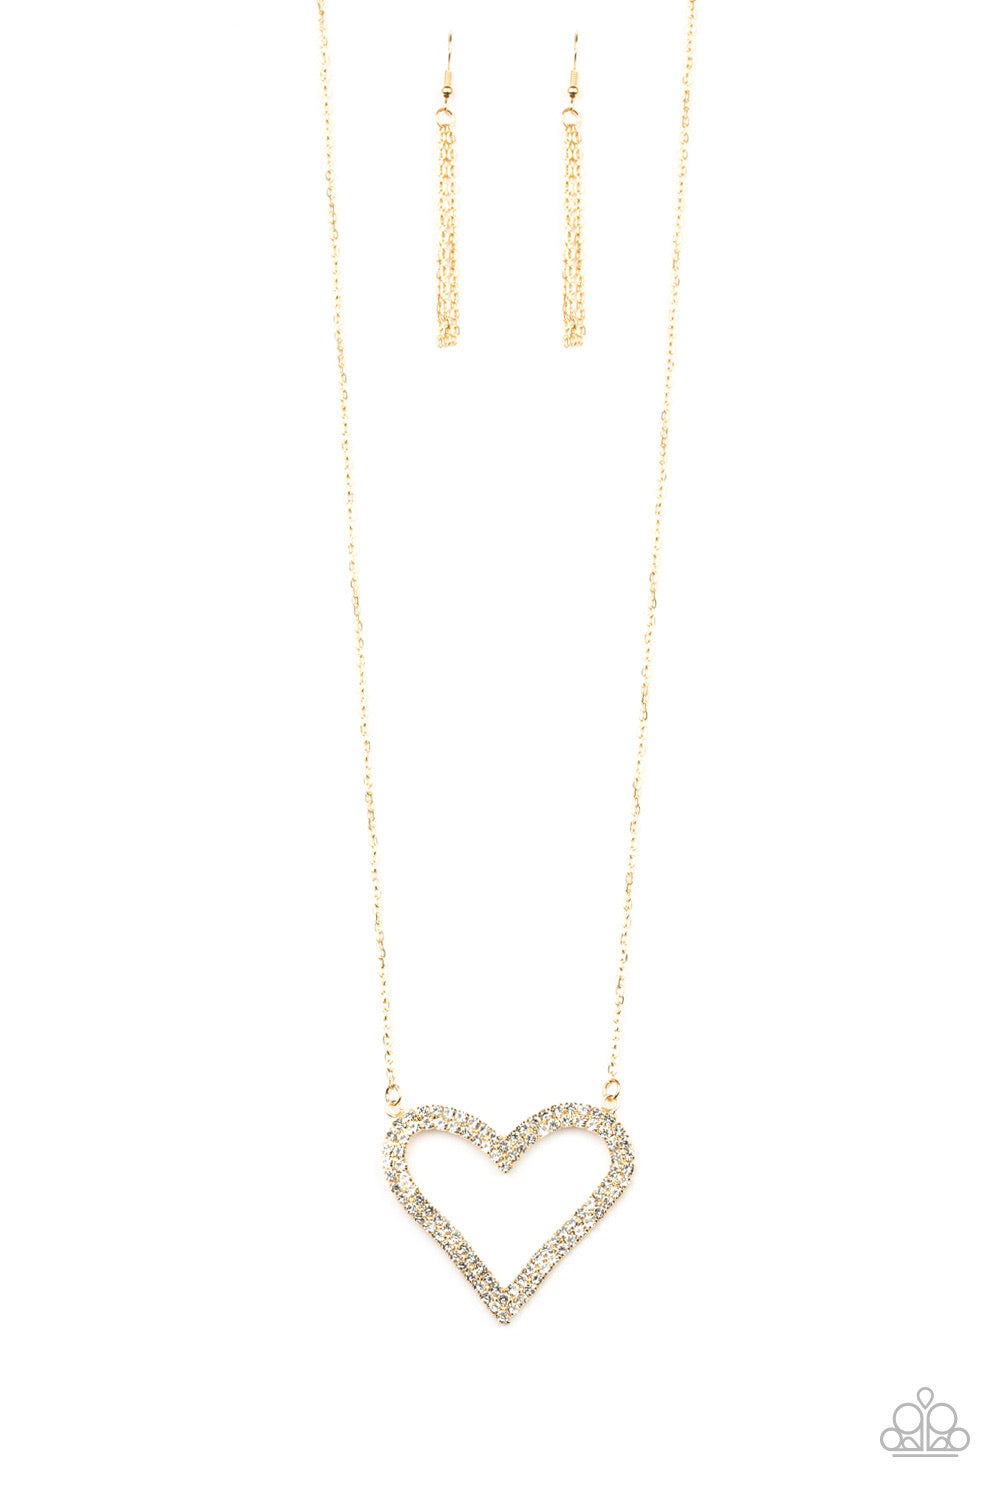 Pull Some HEART-strings Gold-Necklace